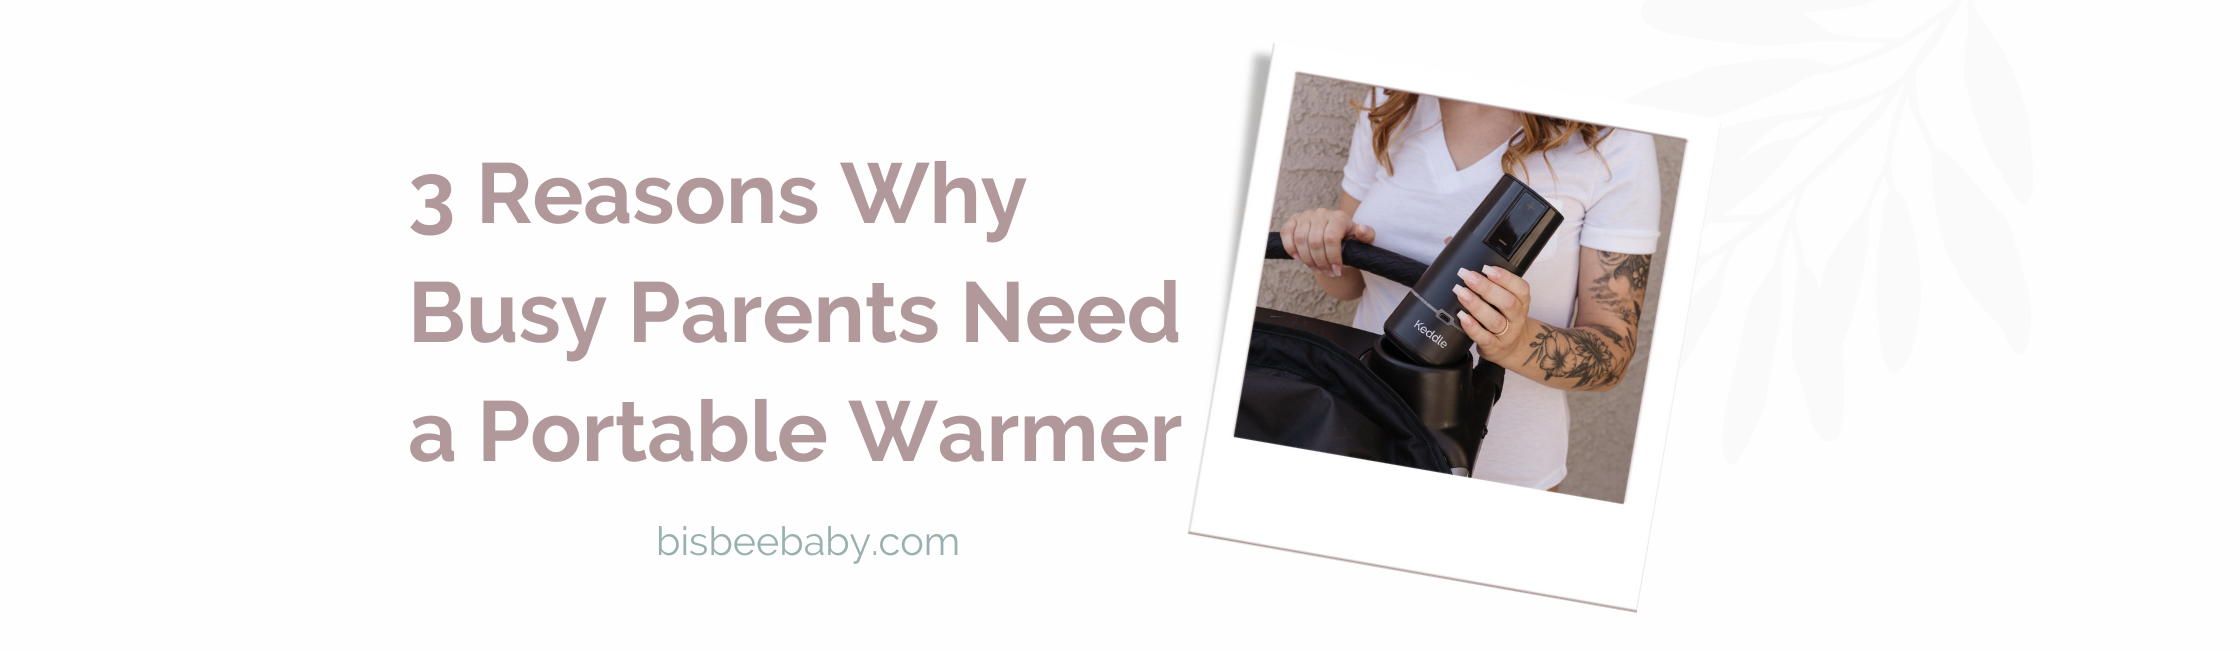 3 Reasons Why Busy Parents Need a Portable Warmer bisbeebaby.com